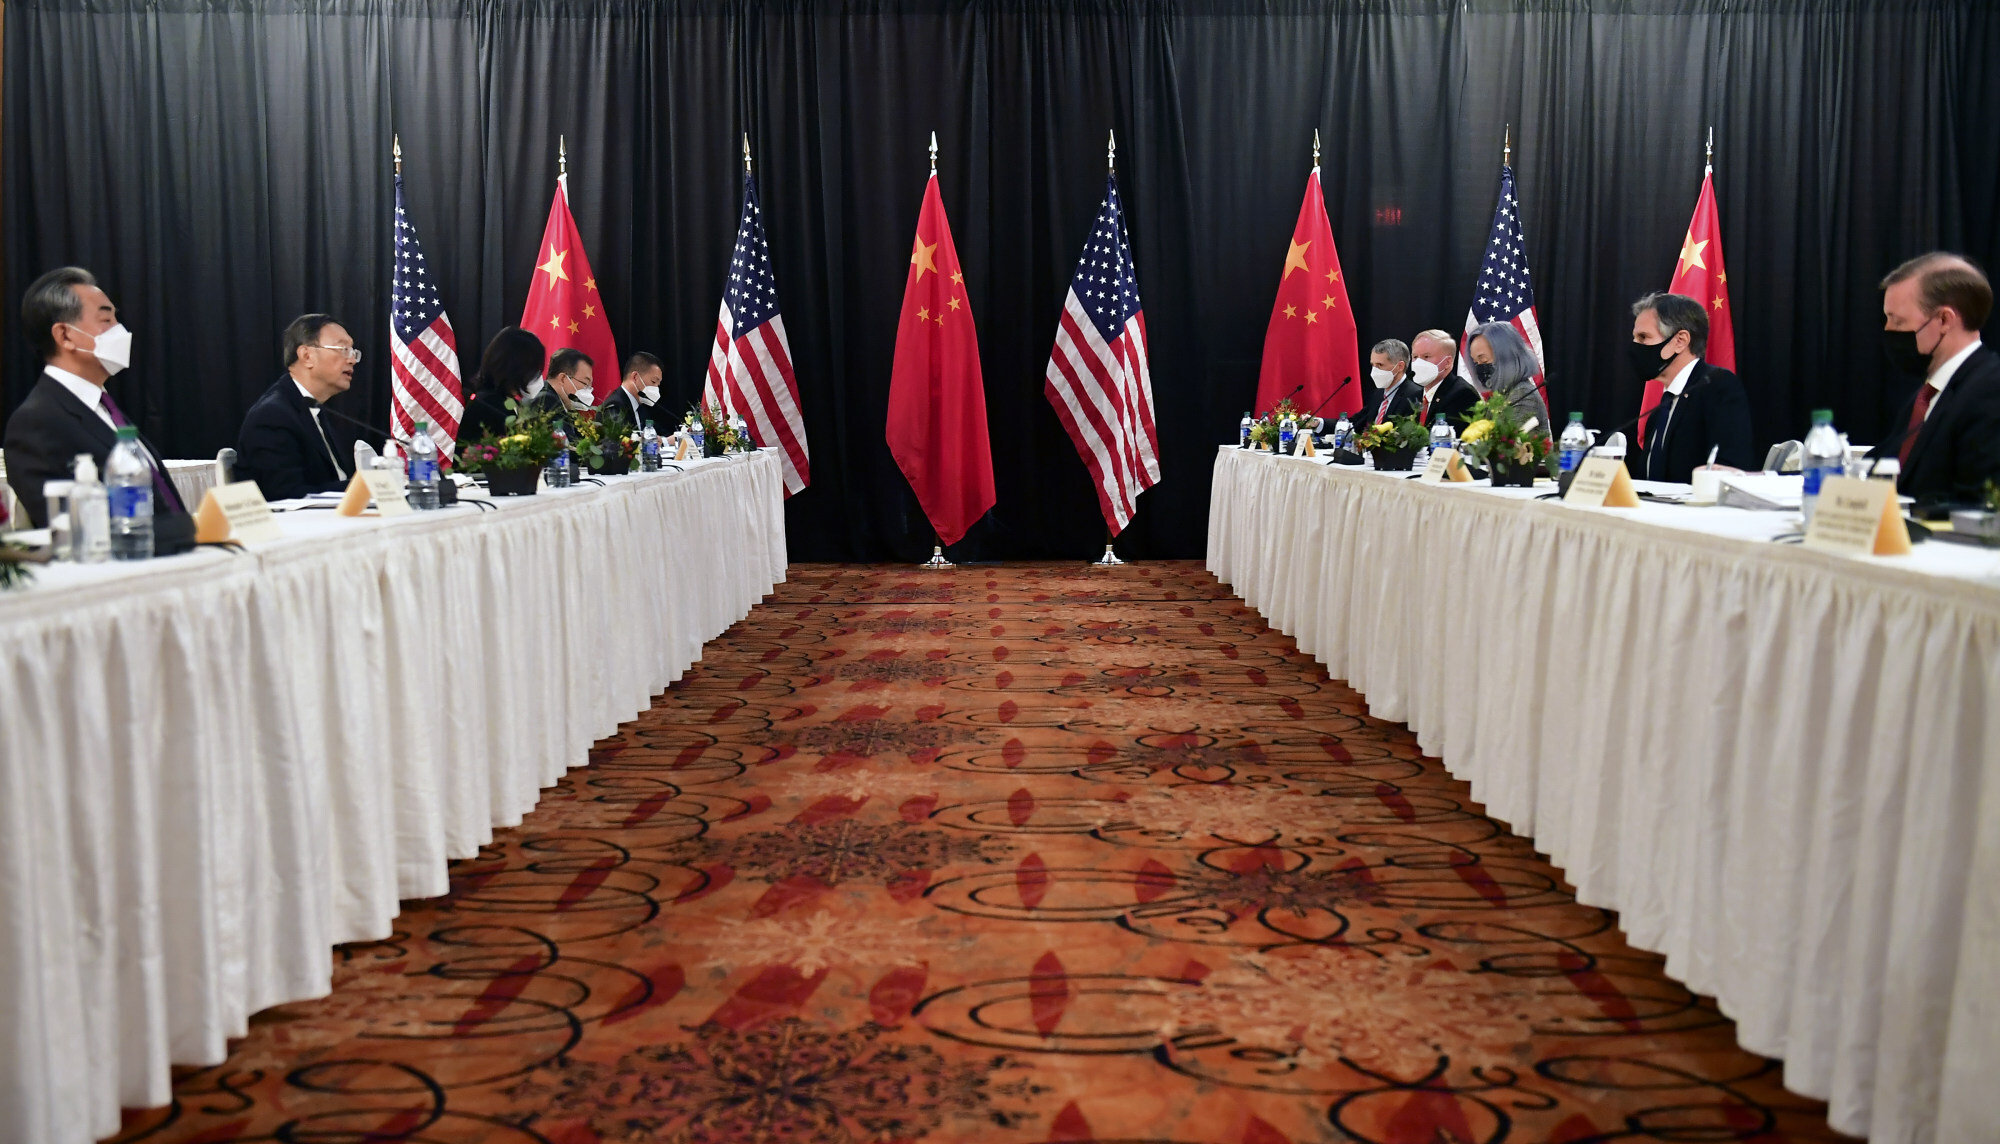 Secretary of State Antony Blinken, second from right, joined by national security adviser Jake Sullivan, right, speaks while facing Chinese Communist Party foreign affairs chief Yang Jiechi, second from left, and China’s State Councilor Wang Yi, left, at the opening session of US-China talks at the Captain Cook Hotel in Anchorage, Alaska in March 2021. Photo: AP